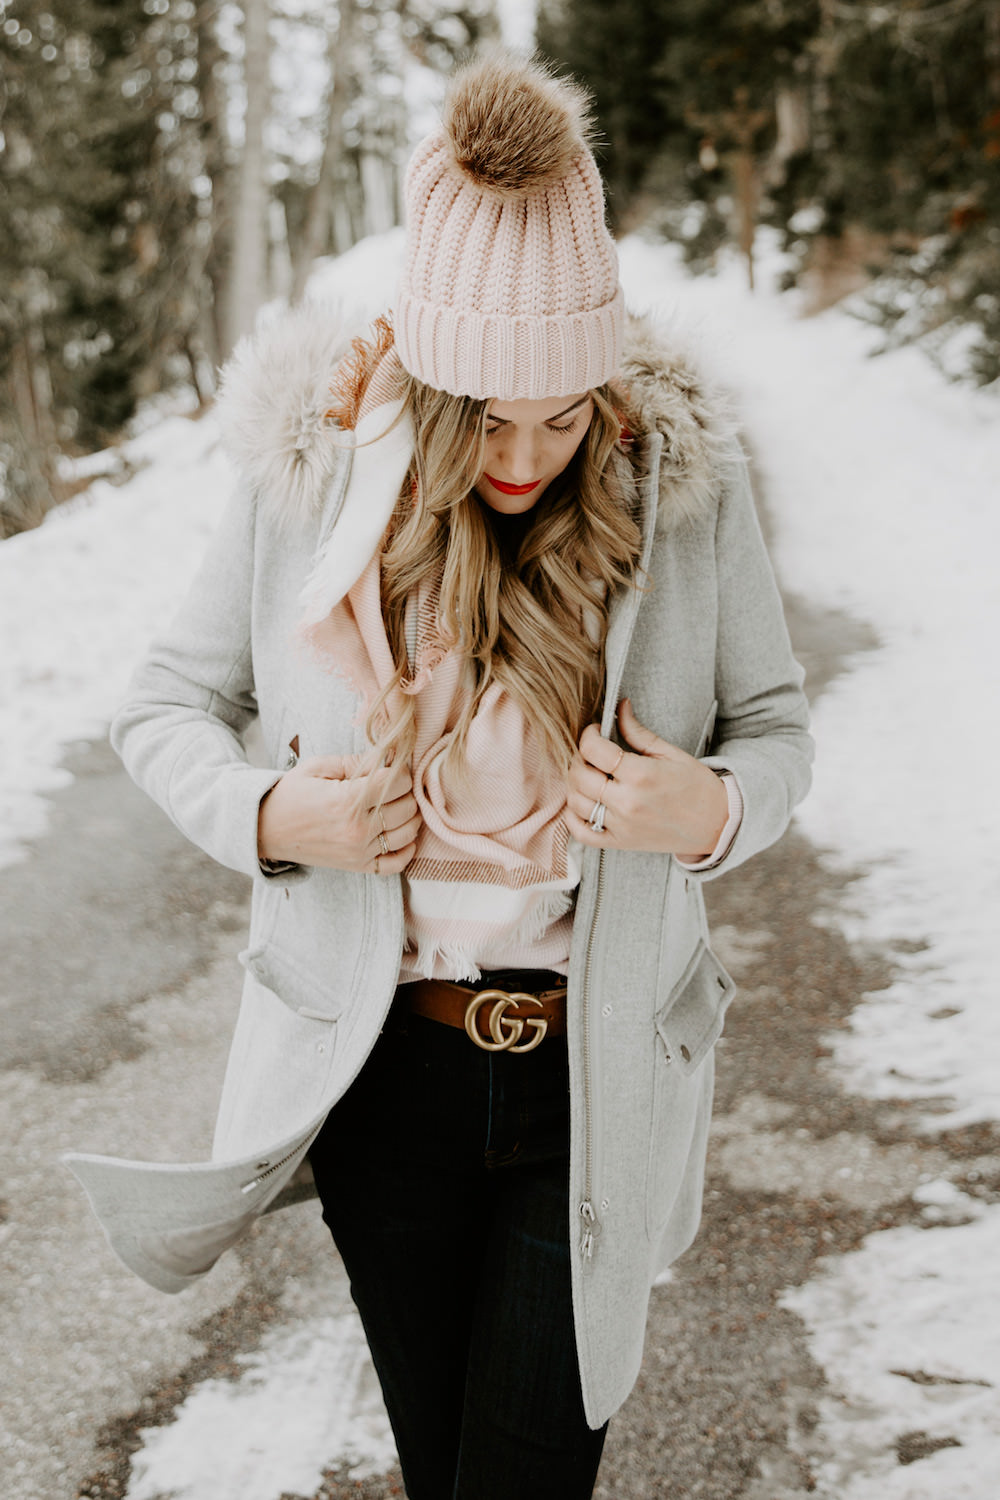 dash-of-darling-pink-scarf-winter-outfit - Dash of Darling